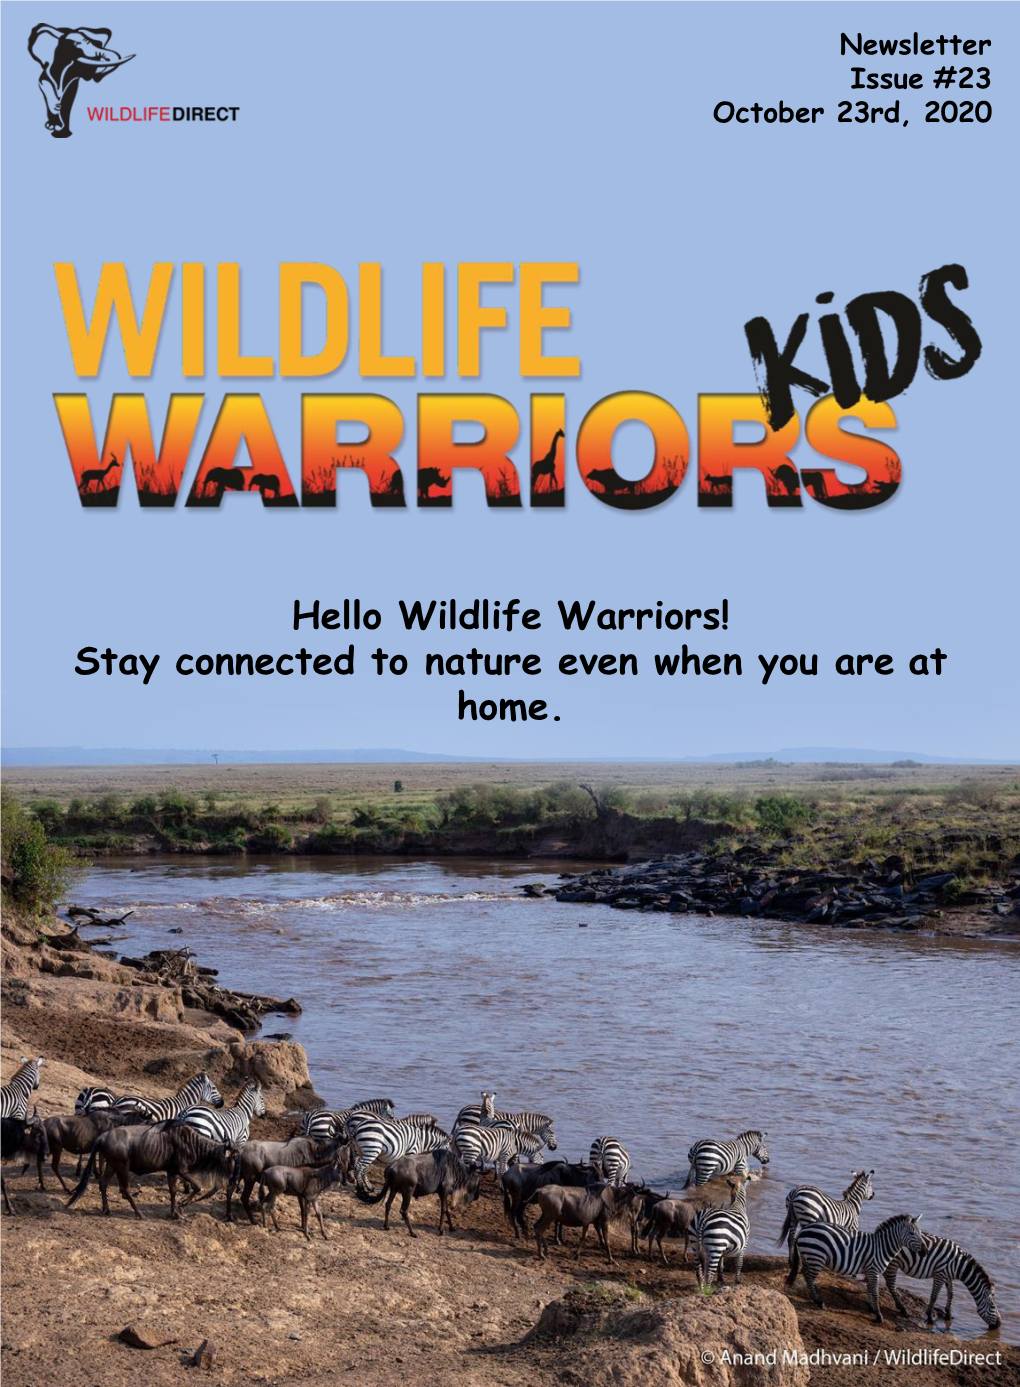 Hello Wildlife Warriors! Stay Connected to Nature Even When You Are at Home